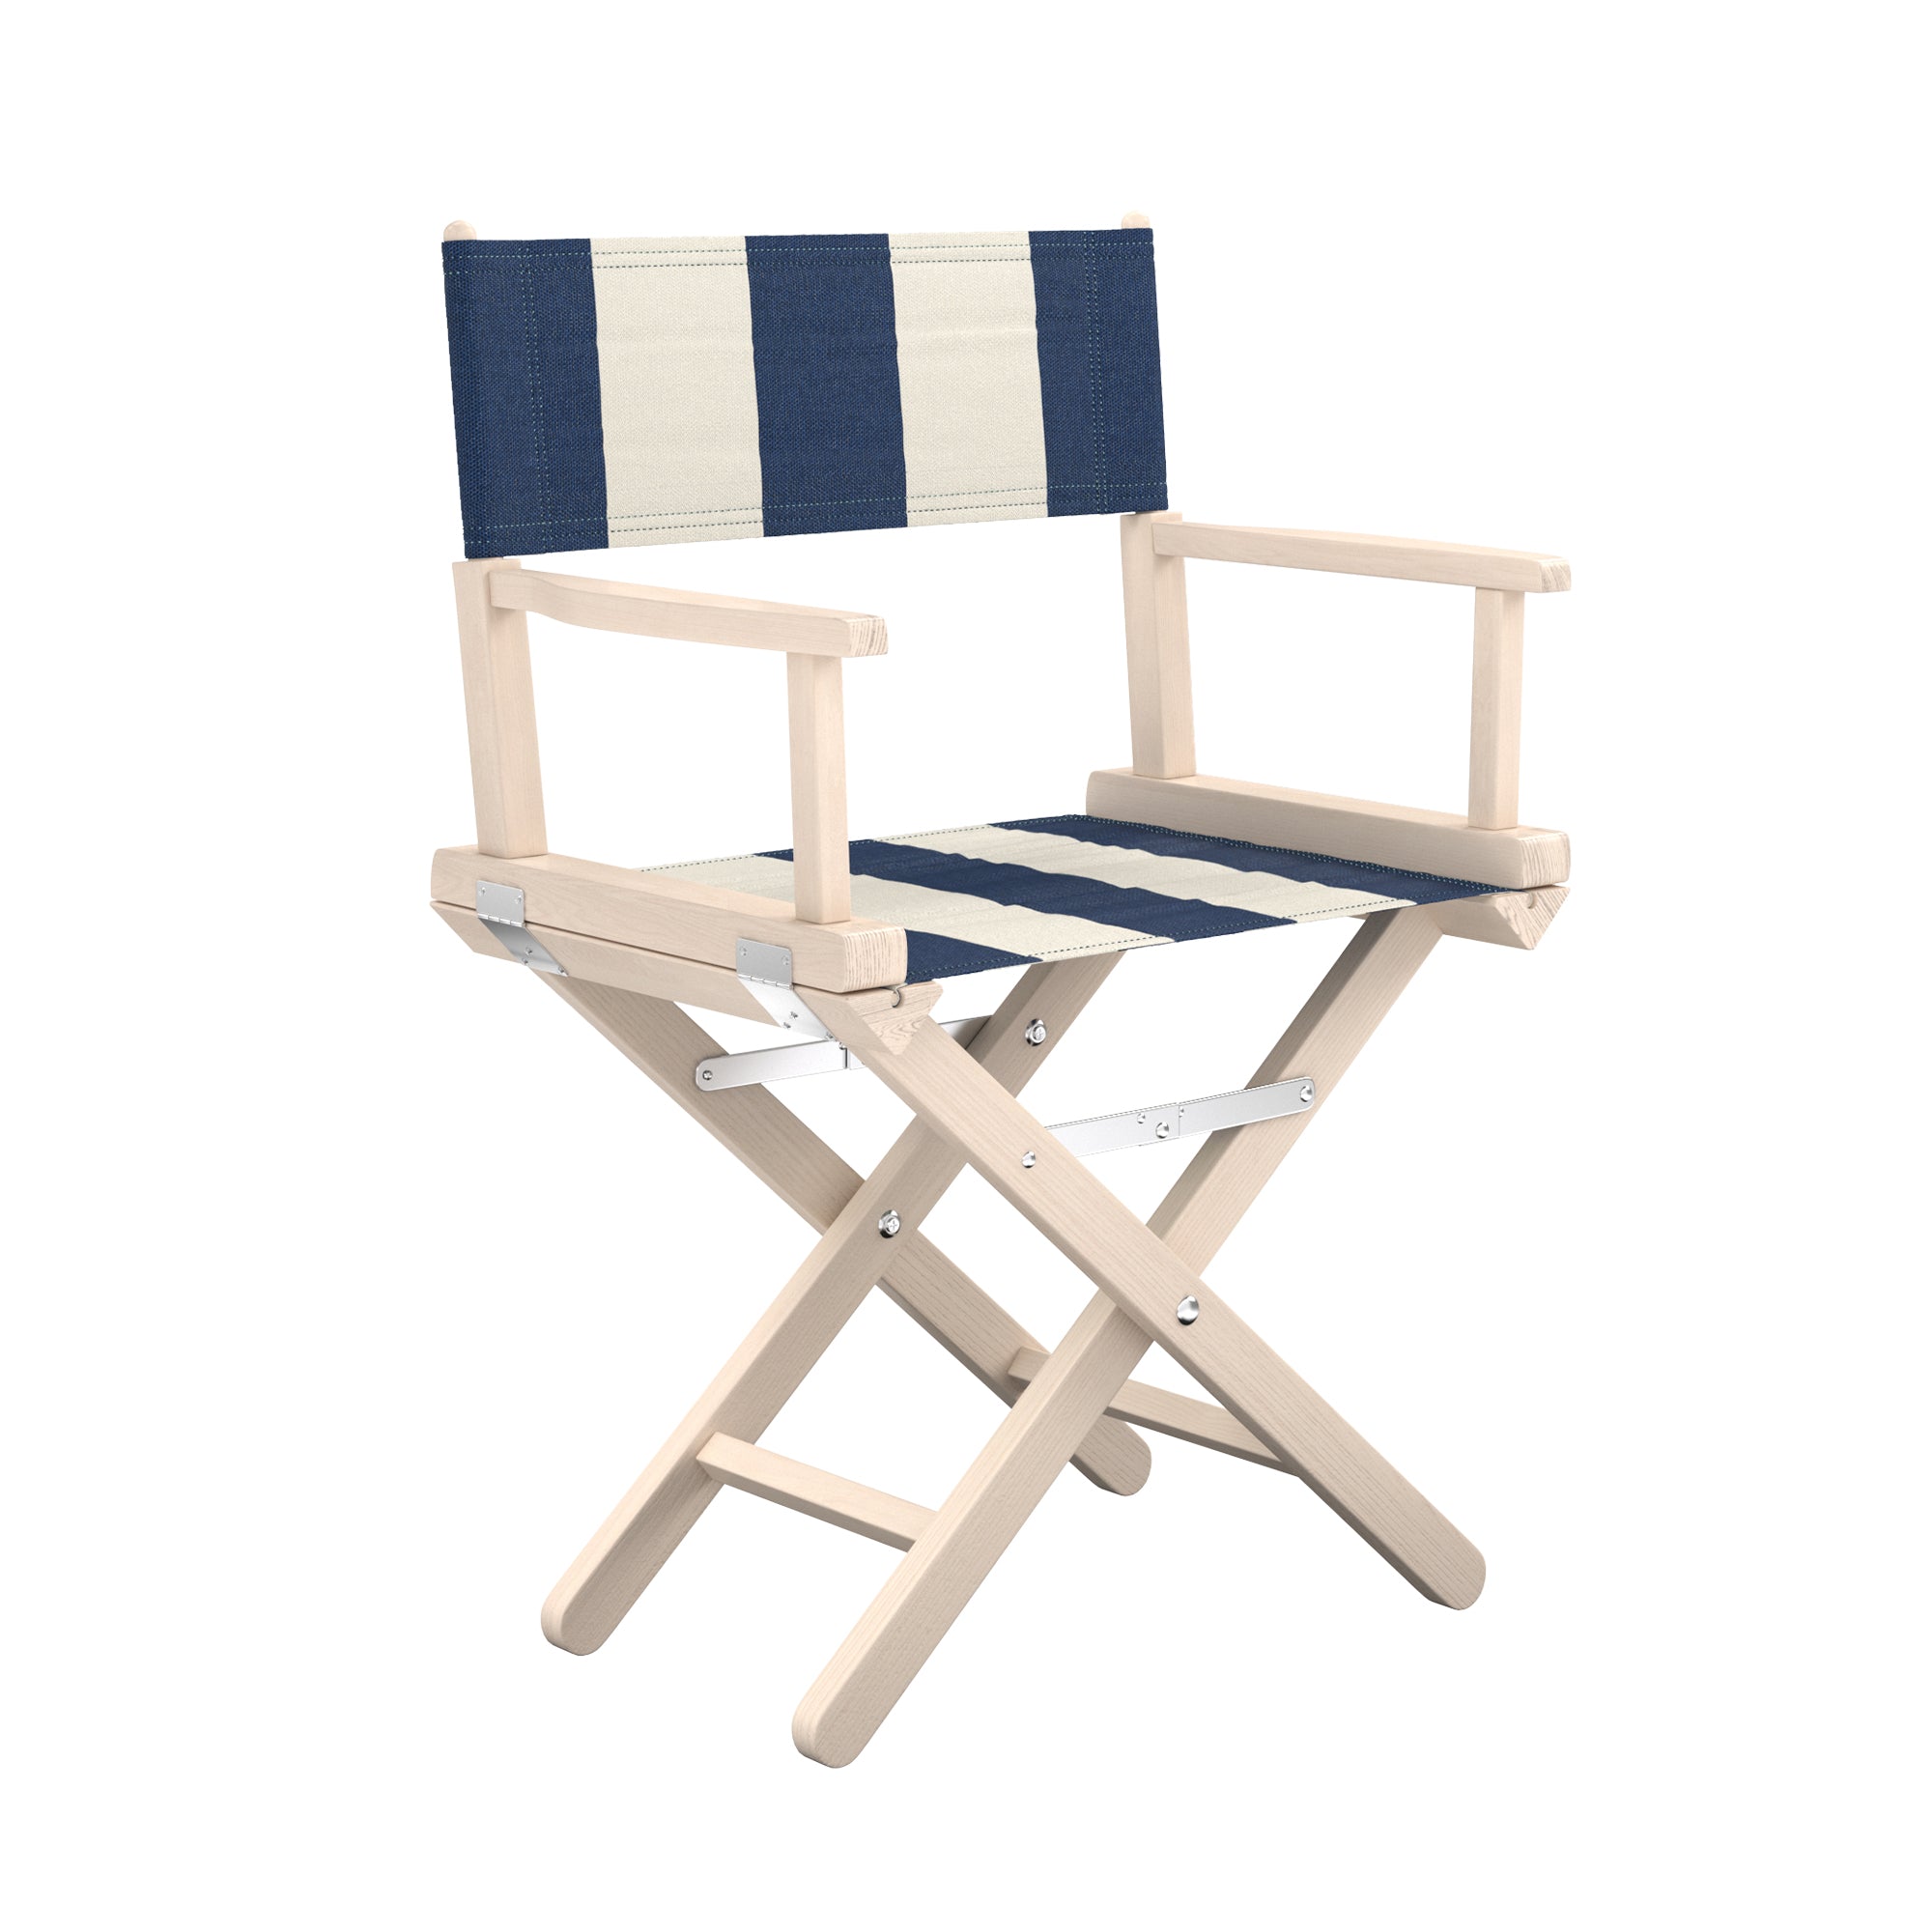 Director's%20Chair%20in%20Navy%20Bold%20Stripe%20&%20White%20Stained%20Beech image 2